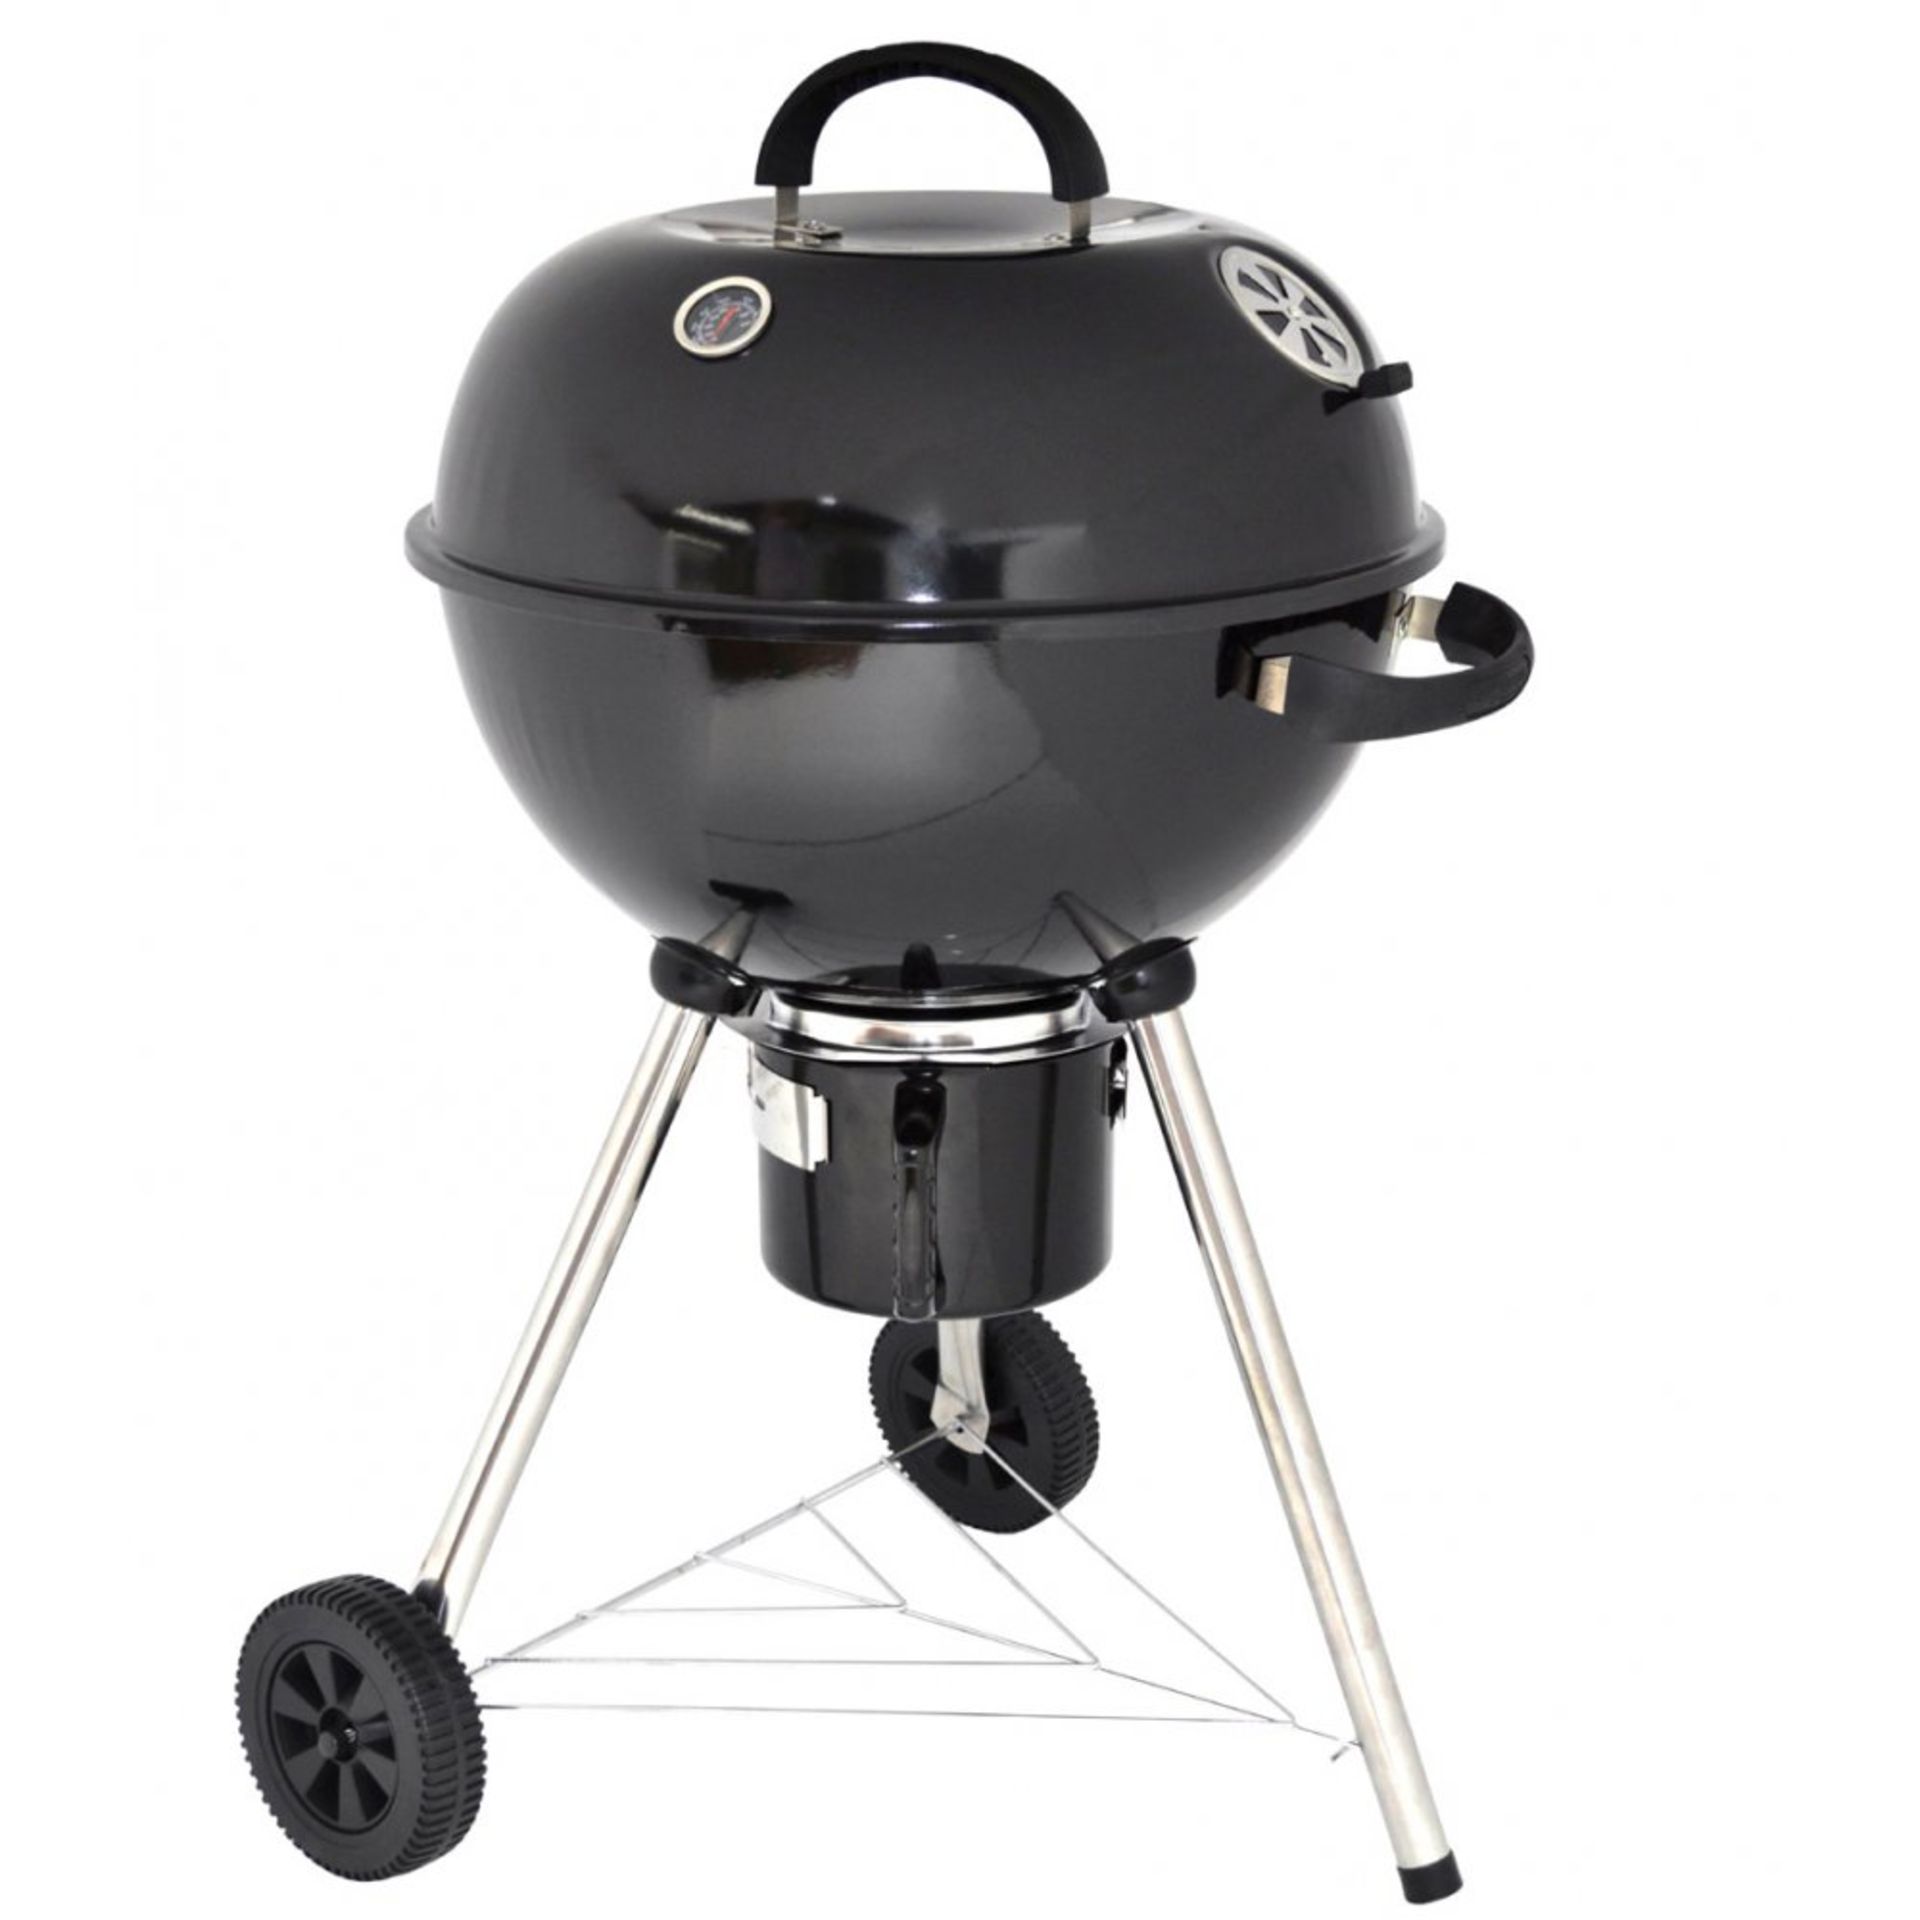 V Brand New 47cm Deluxe Kettle BBQ Amazon Price - £65.00 X 2 YOUR BID PRICE TO BE MULTIPLIED BY TWO